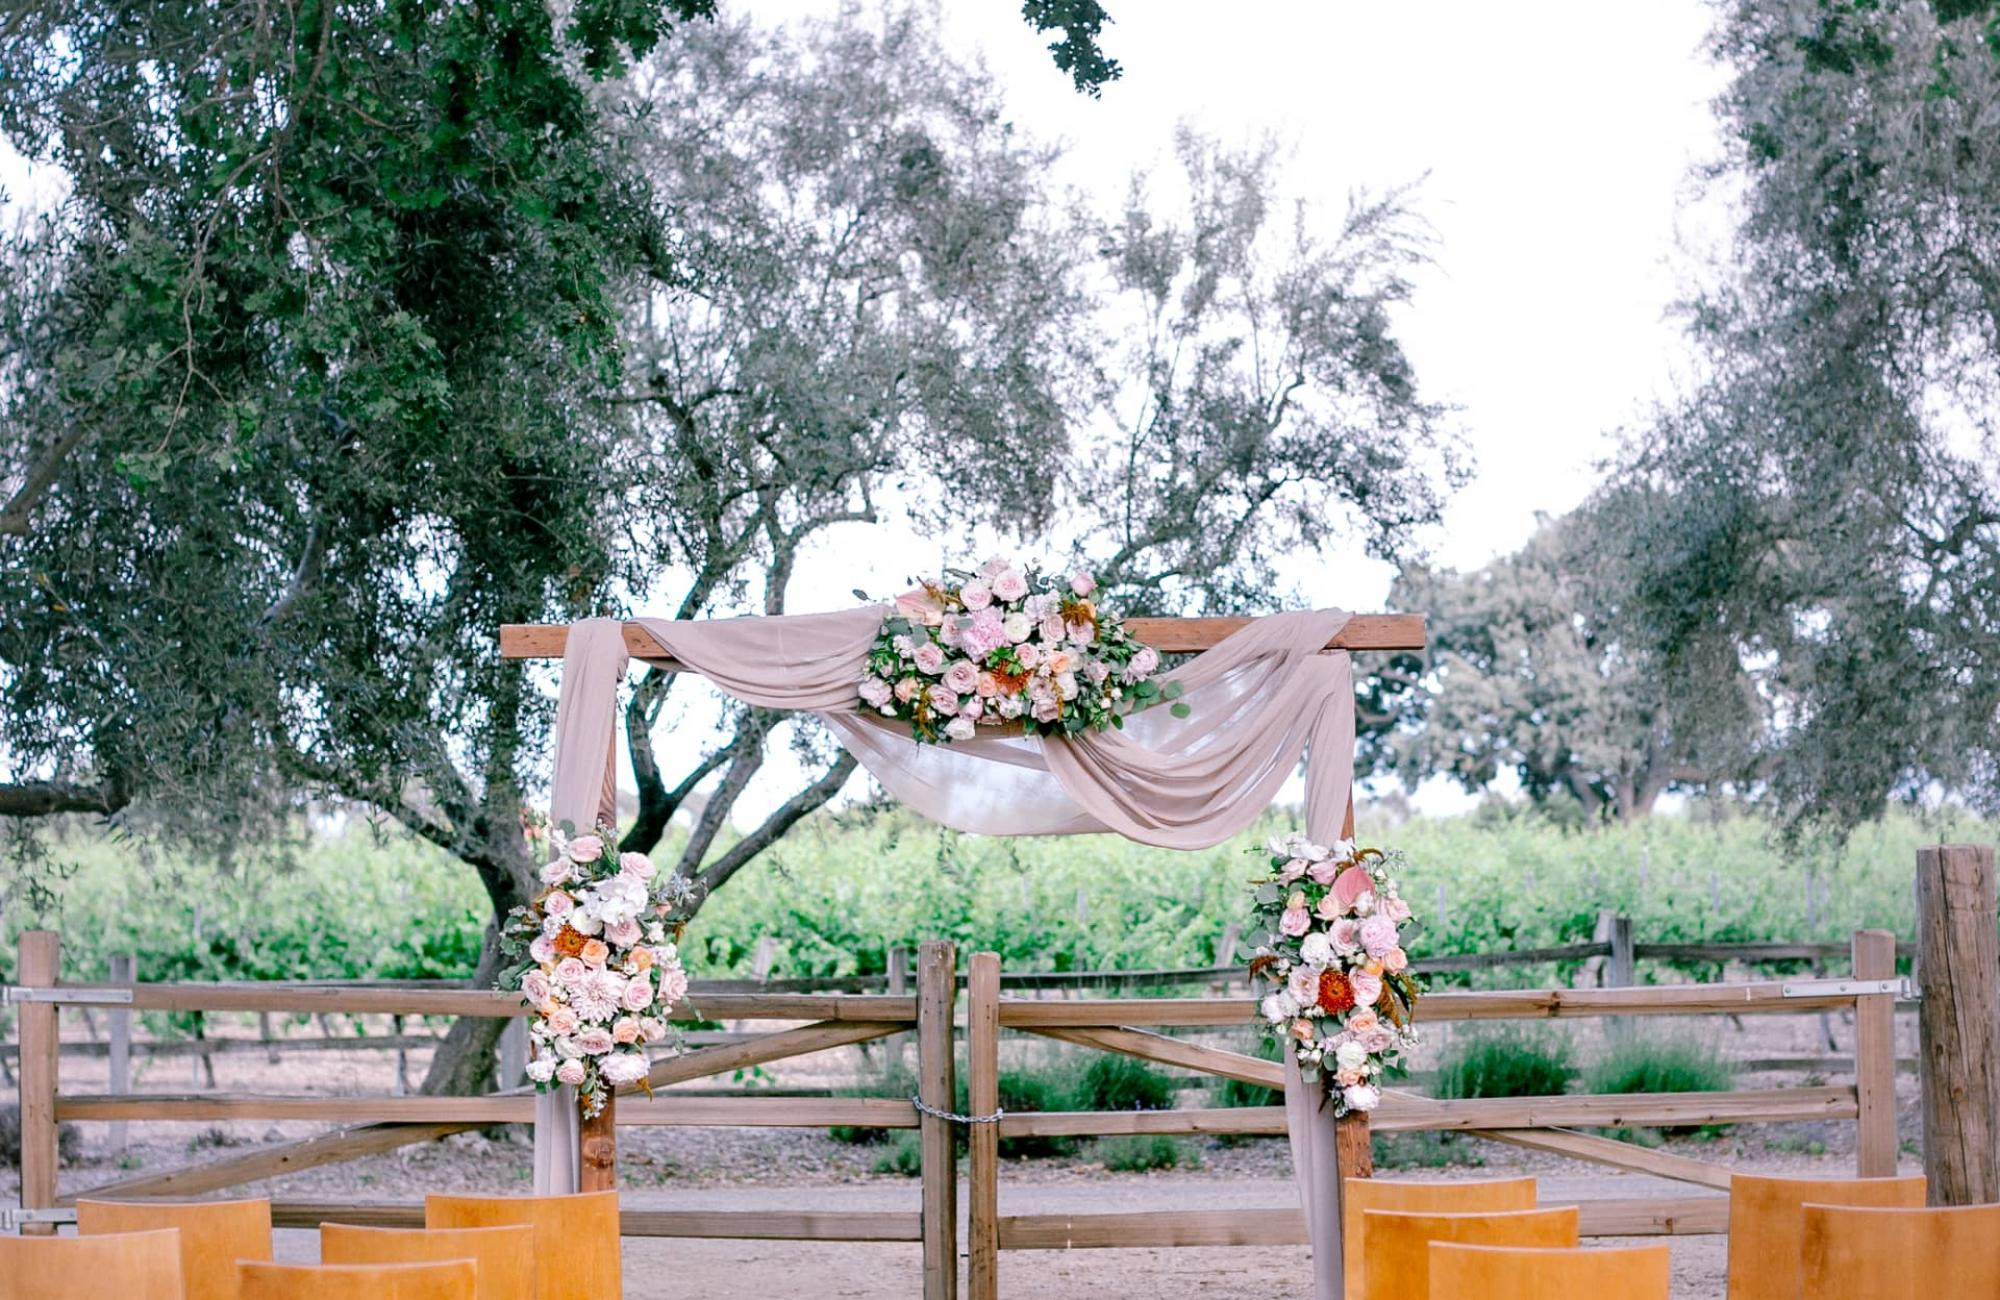 Outdoor Reception Area with Chairs, Flower Arrangements & Archway at Petros Winery